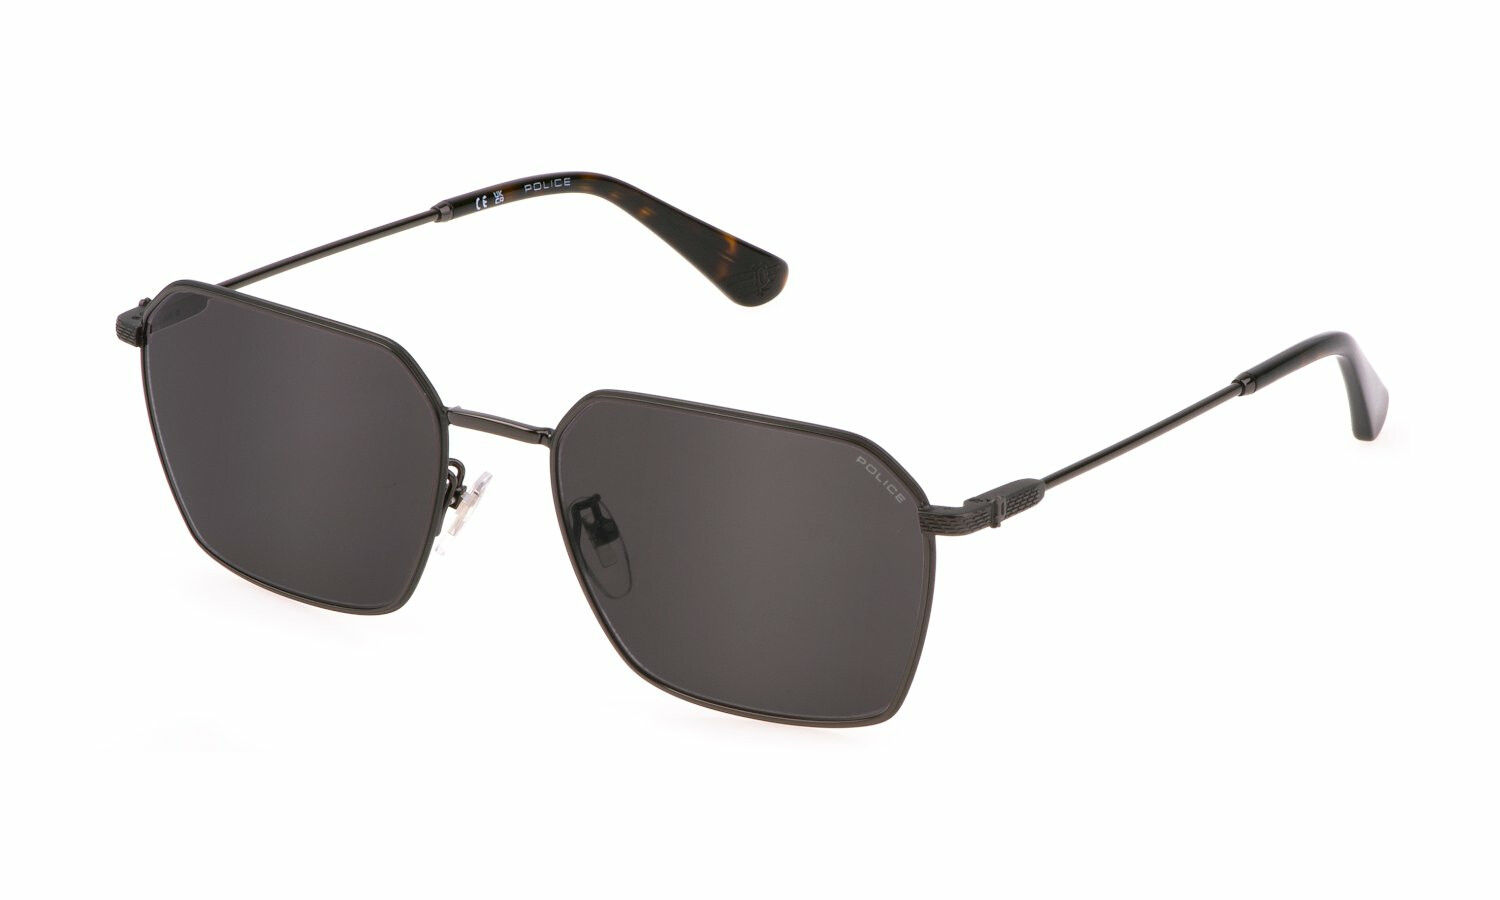 [products.image.front] Police SPLL84 560568 Sonnenbrille